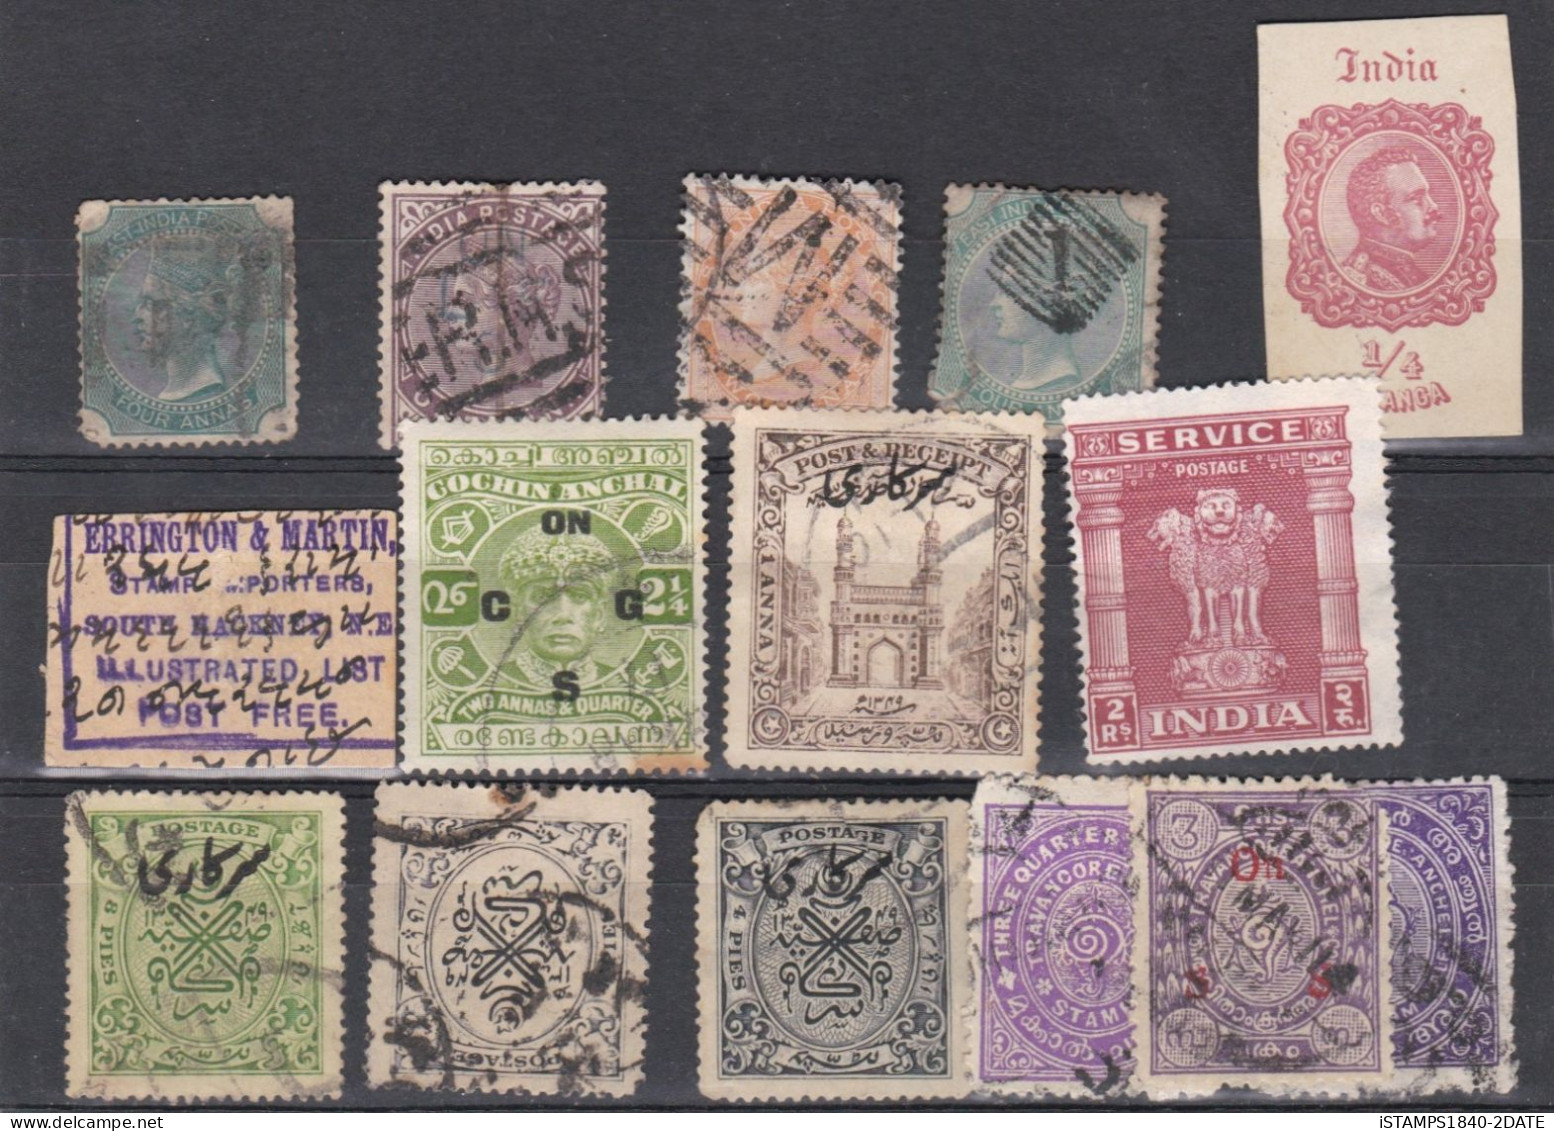 00032/ India QV+ Selection Including States 15 Items Used - 1882-1901 Empire